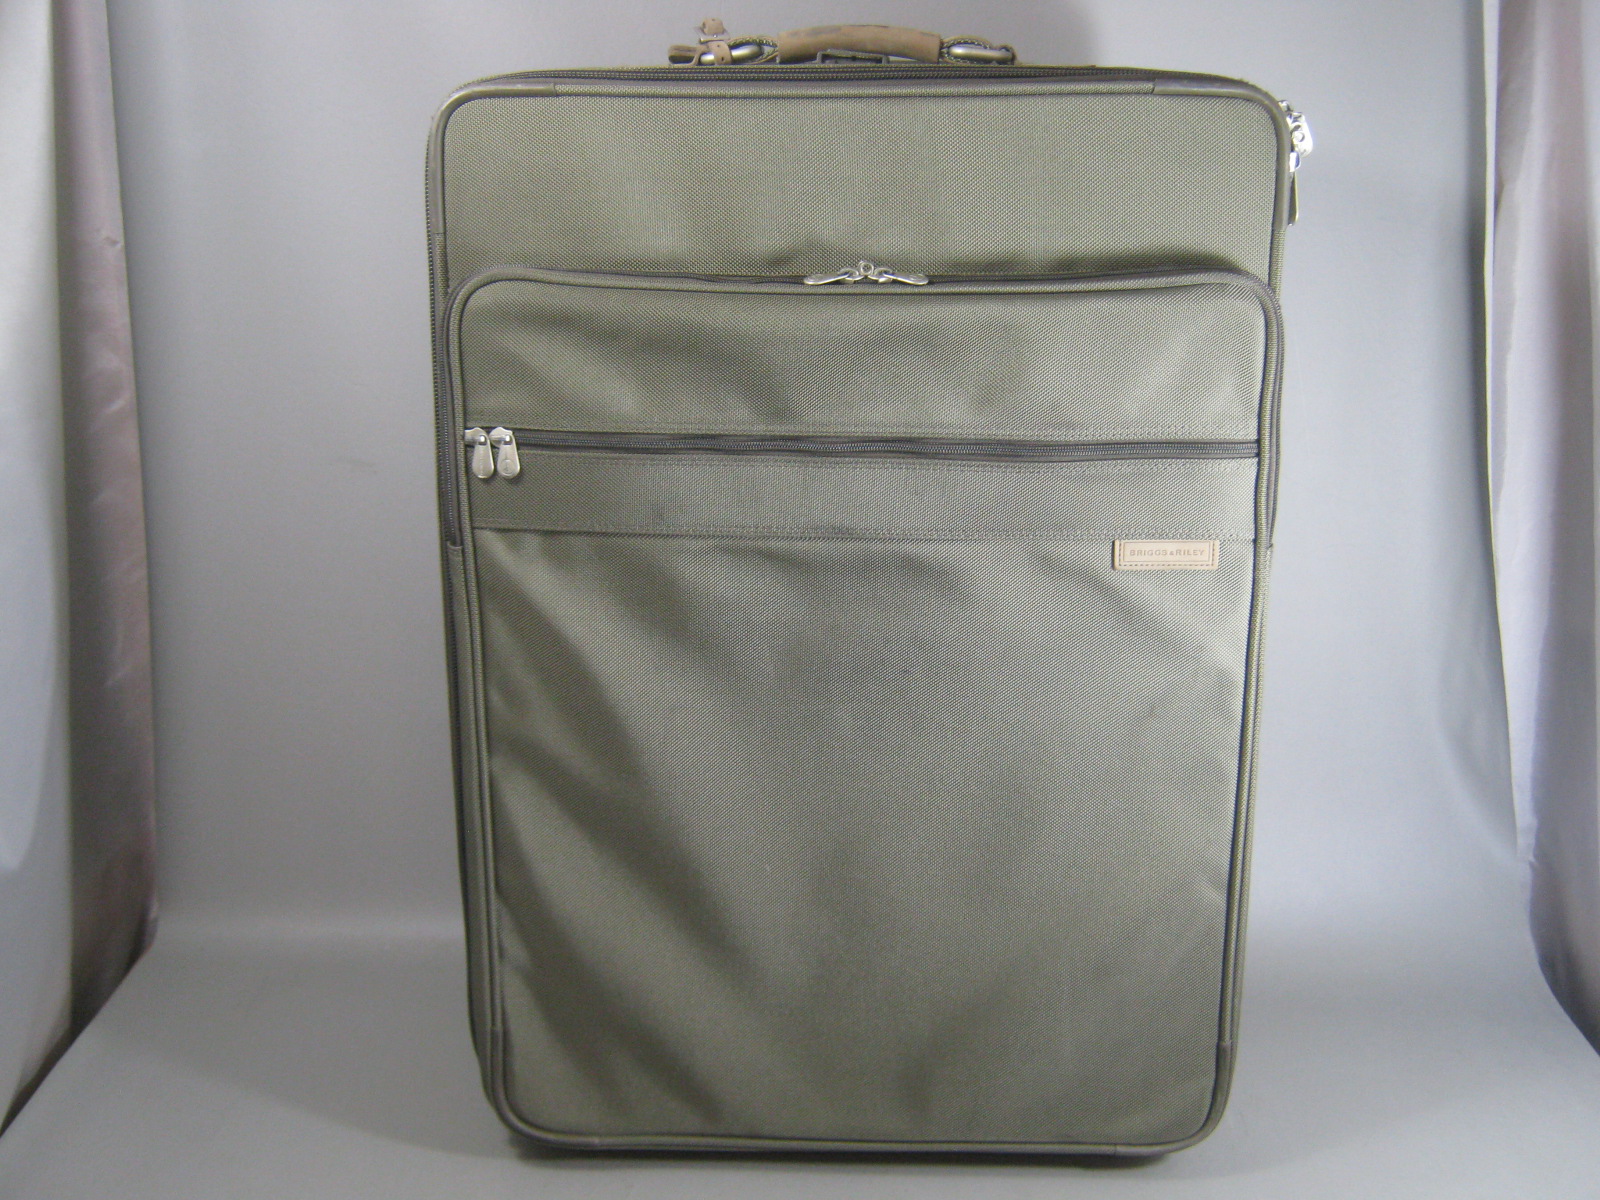 Briggs & Riley Suitcase 28" Baseline Luggage Olive Green Wheeled Upright No Res